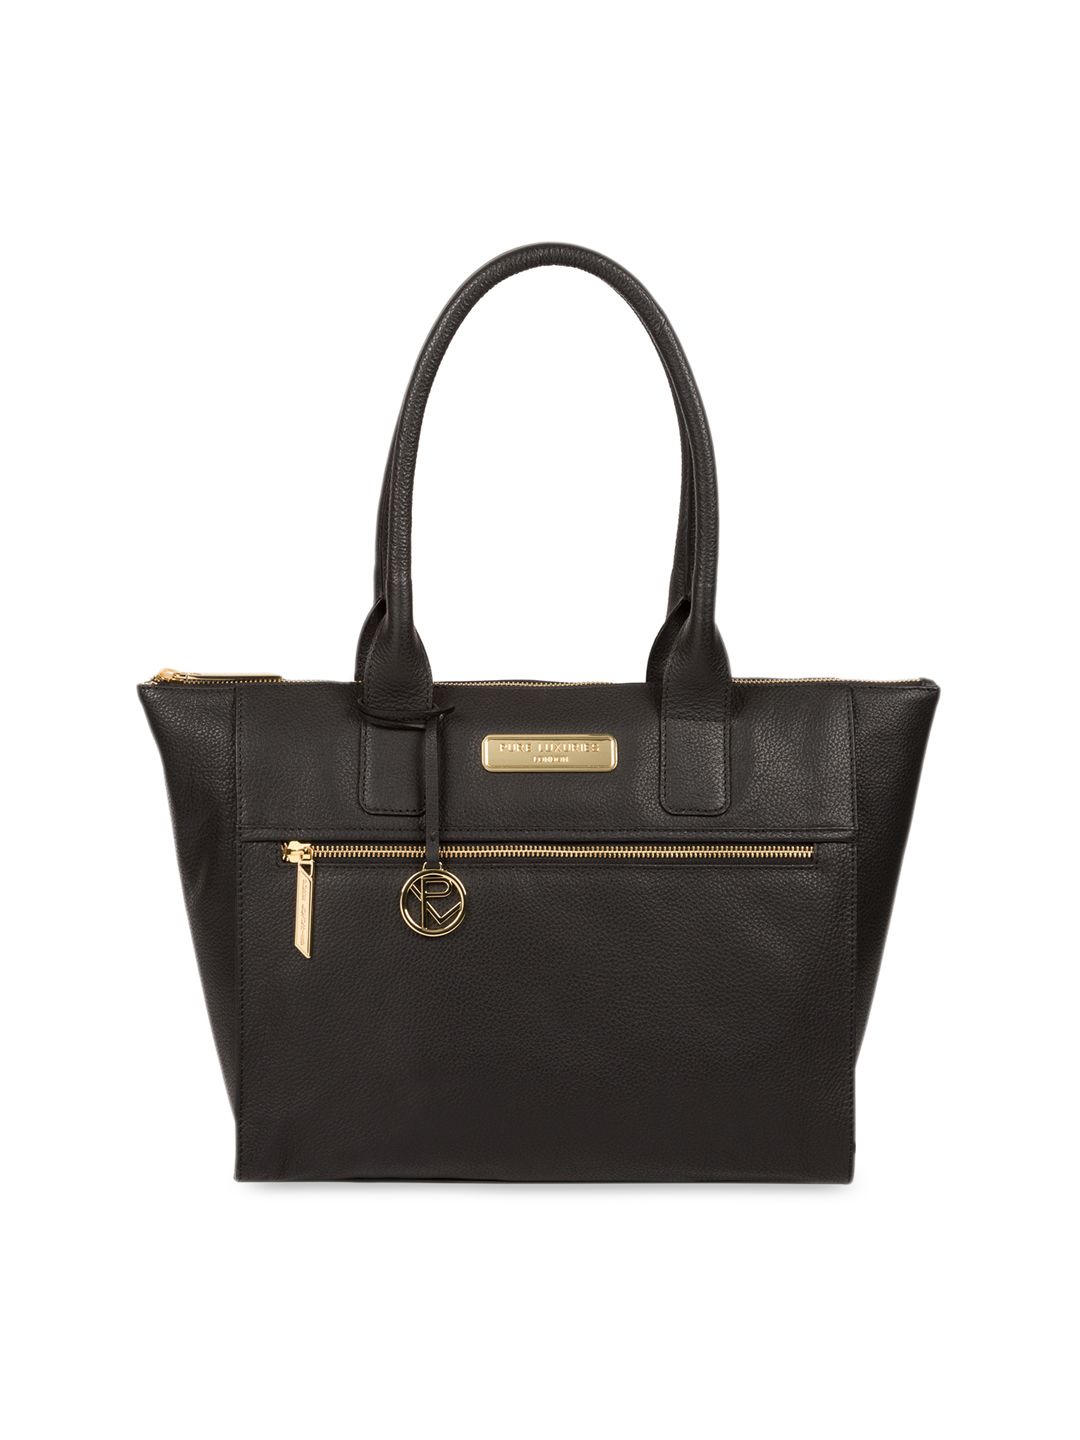 PURE LUXURIES LONDON Women Black Solid Genuine Leather Faye Tote Bag Price in India